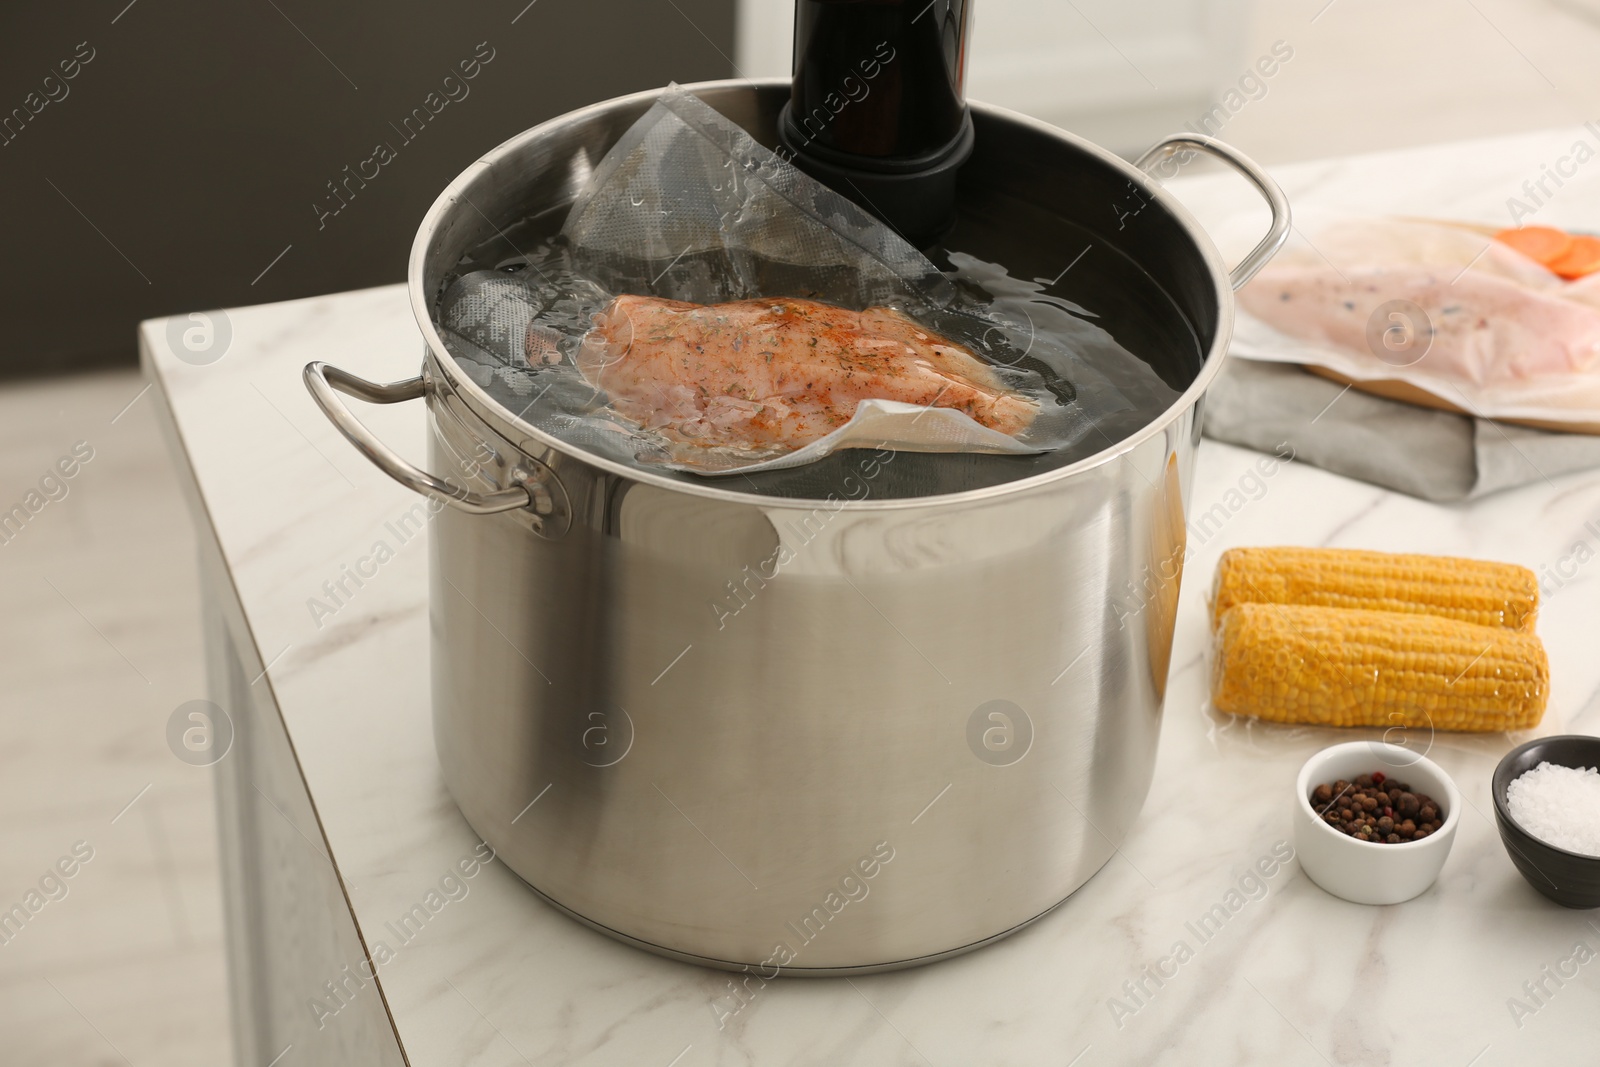 Photo of Sous vide cooker and vacuum packed meat in pot on white marble table. Thermal immersion circulator